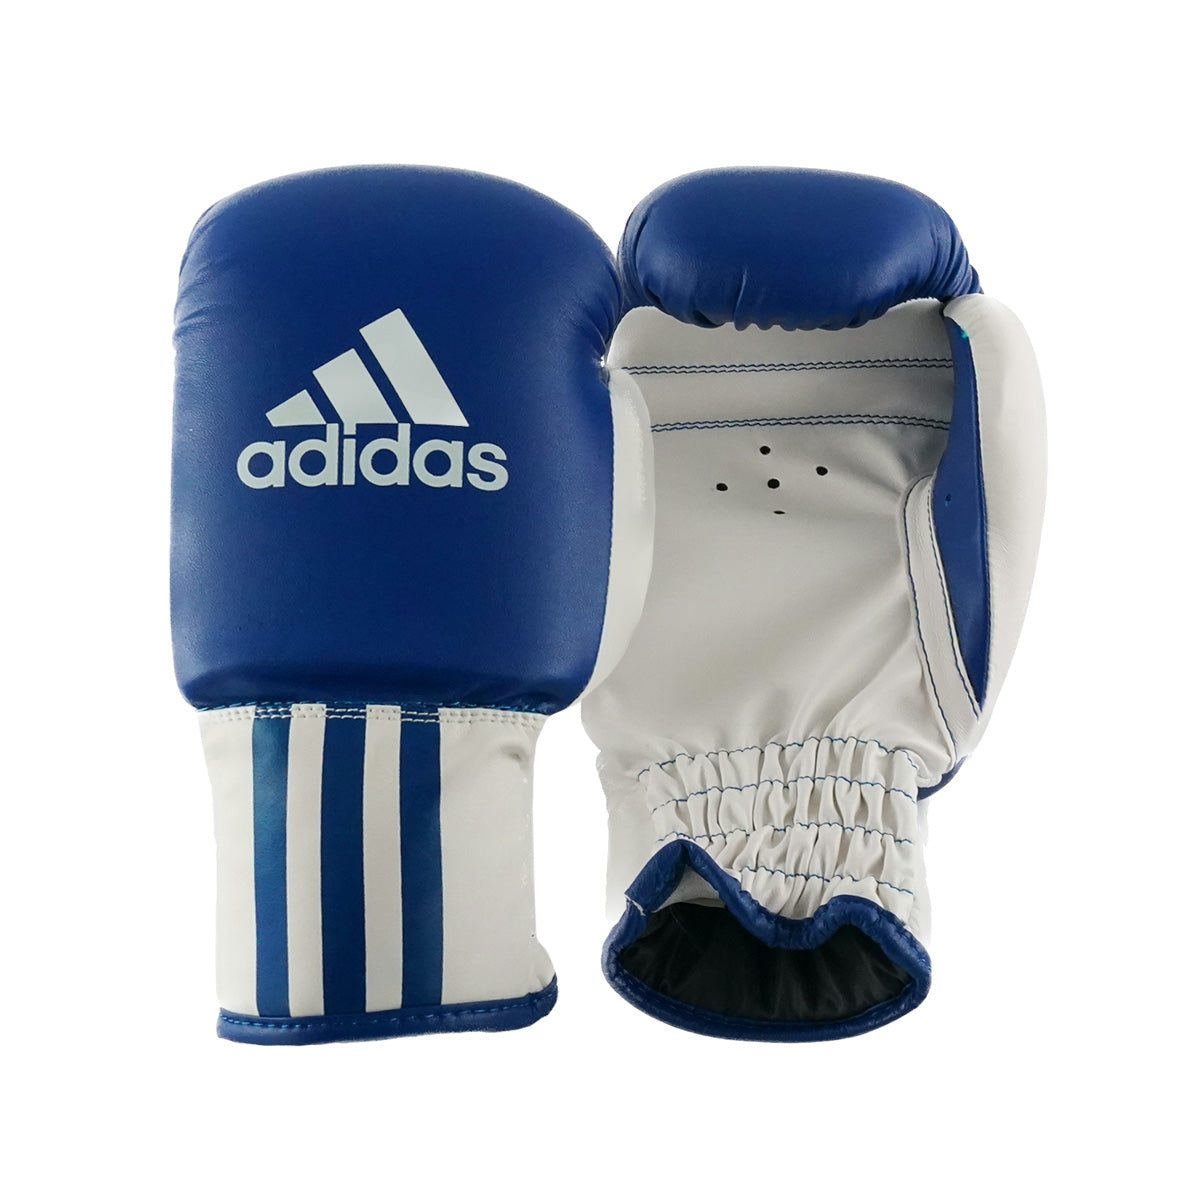 Boxing kit Canada Fighting - Gloves, rope and bandages - Junior-Accessories-Canada Fighting®-Junior Kit-Canada Fighting